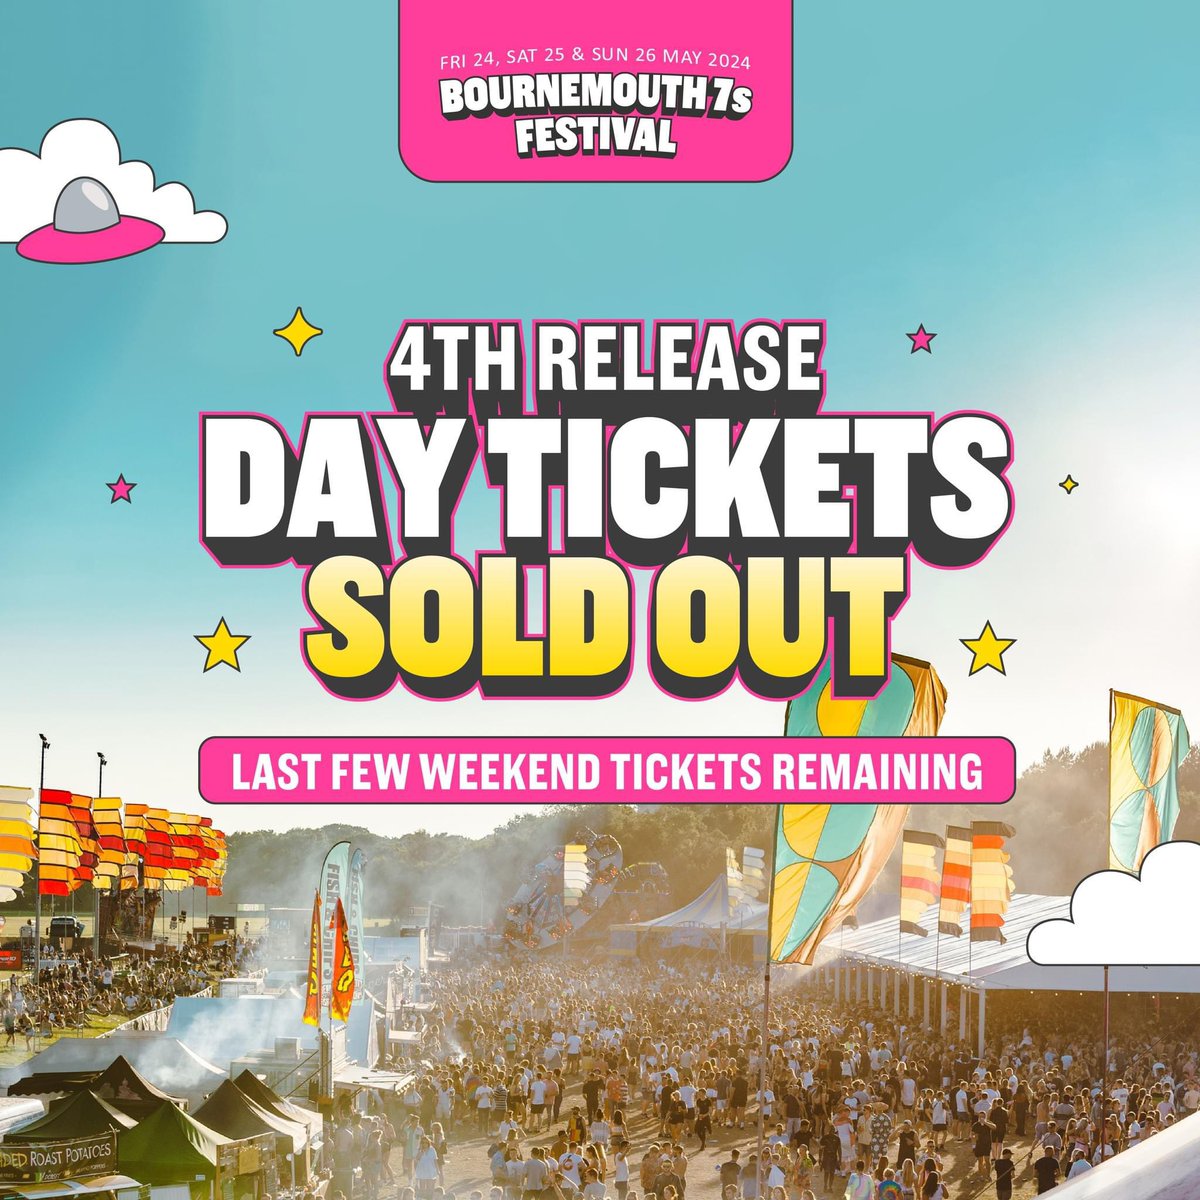 Following the announcement of our day splits yesterday, 4th release day tickets have just 𝗦𝗢𝗟𝗗 𝗢𝗨𝗧 😱 we did warn ya! Last few 4th release weekend tickets remaining 🚨 Get yours 👉 bournemouth7s.com/tickets